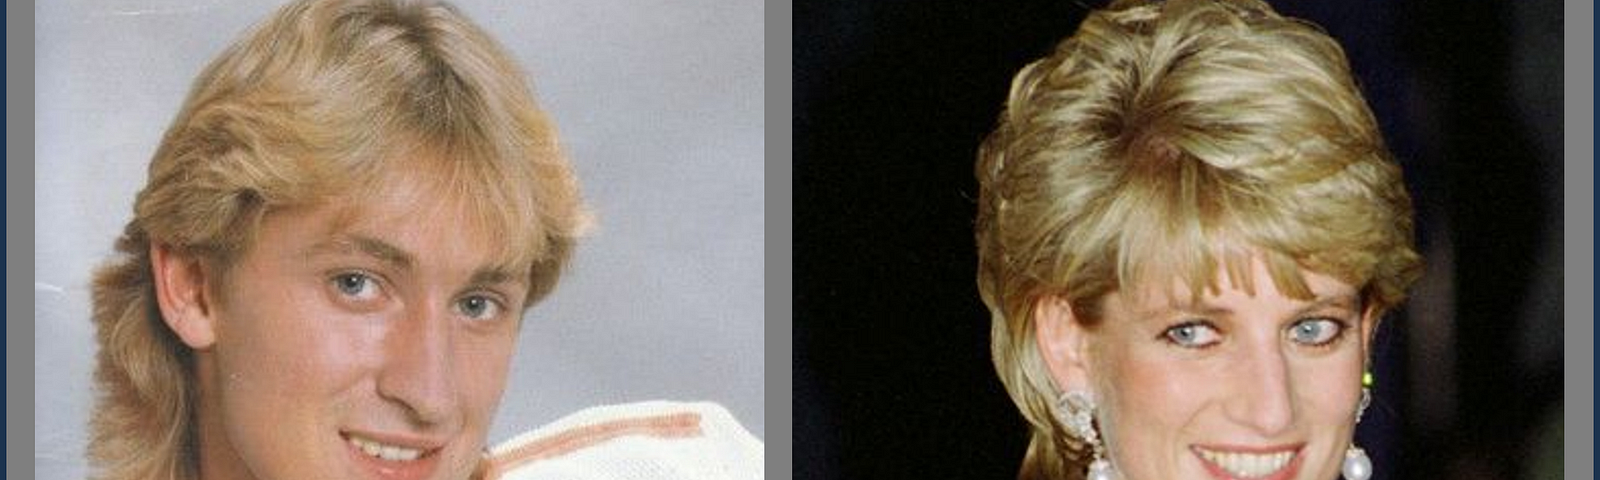 Princess Di and Wayne Gretzsky were hockey royalty and, well, just plain royalty. They were both born in 1961, allegedly on different dates. Strangely, my request for birth certificates has not been answered. Even more strangely, they bear an incredible resemblance to each other.